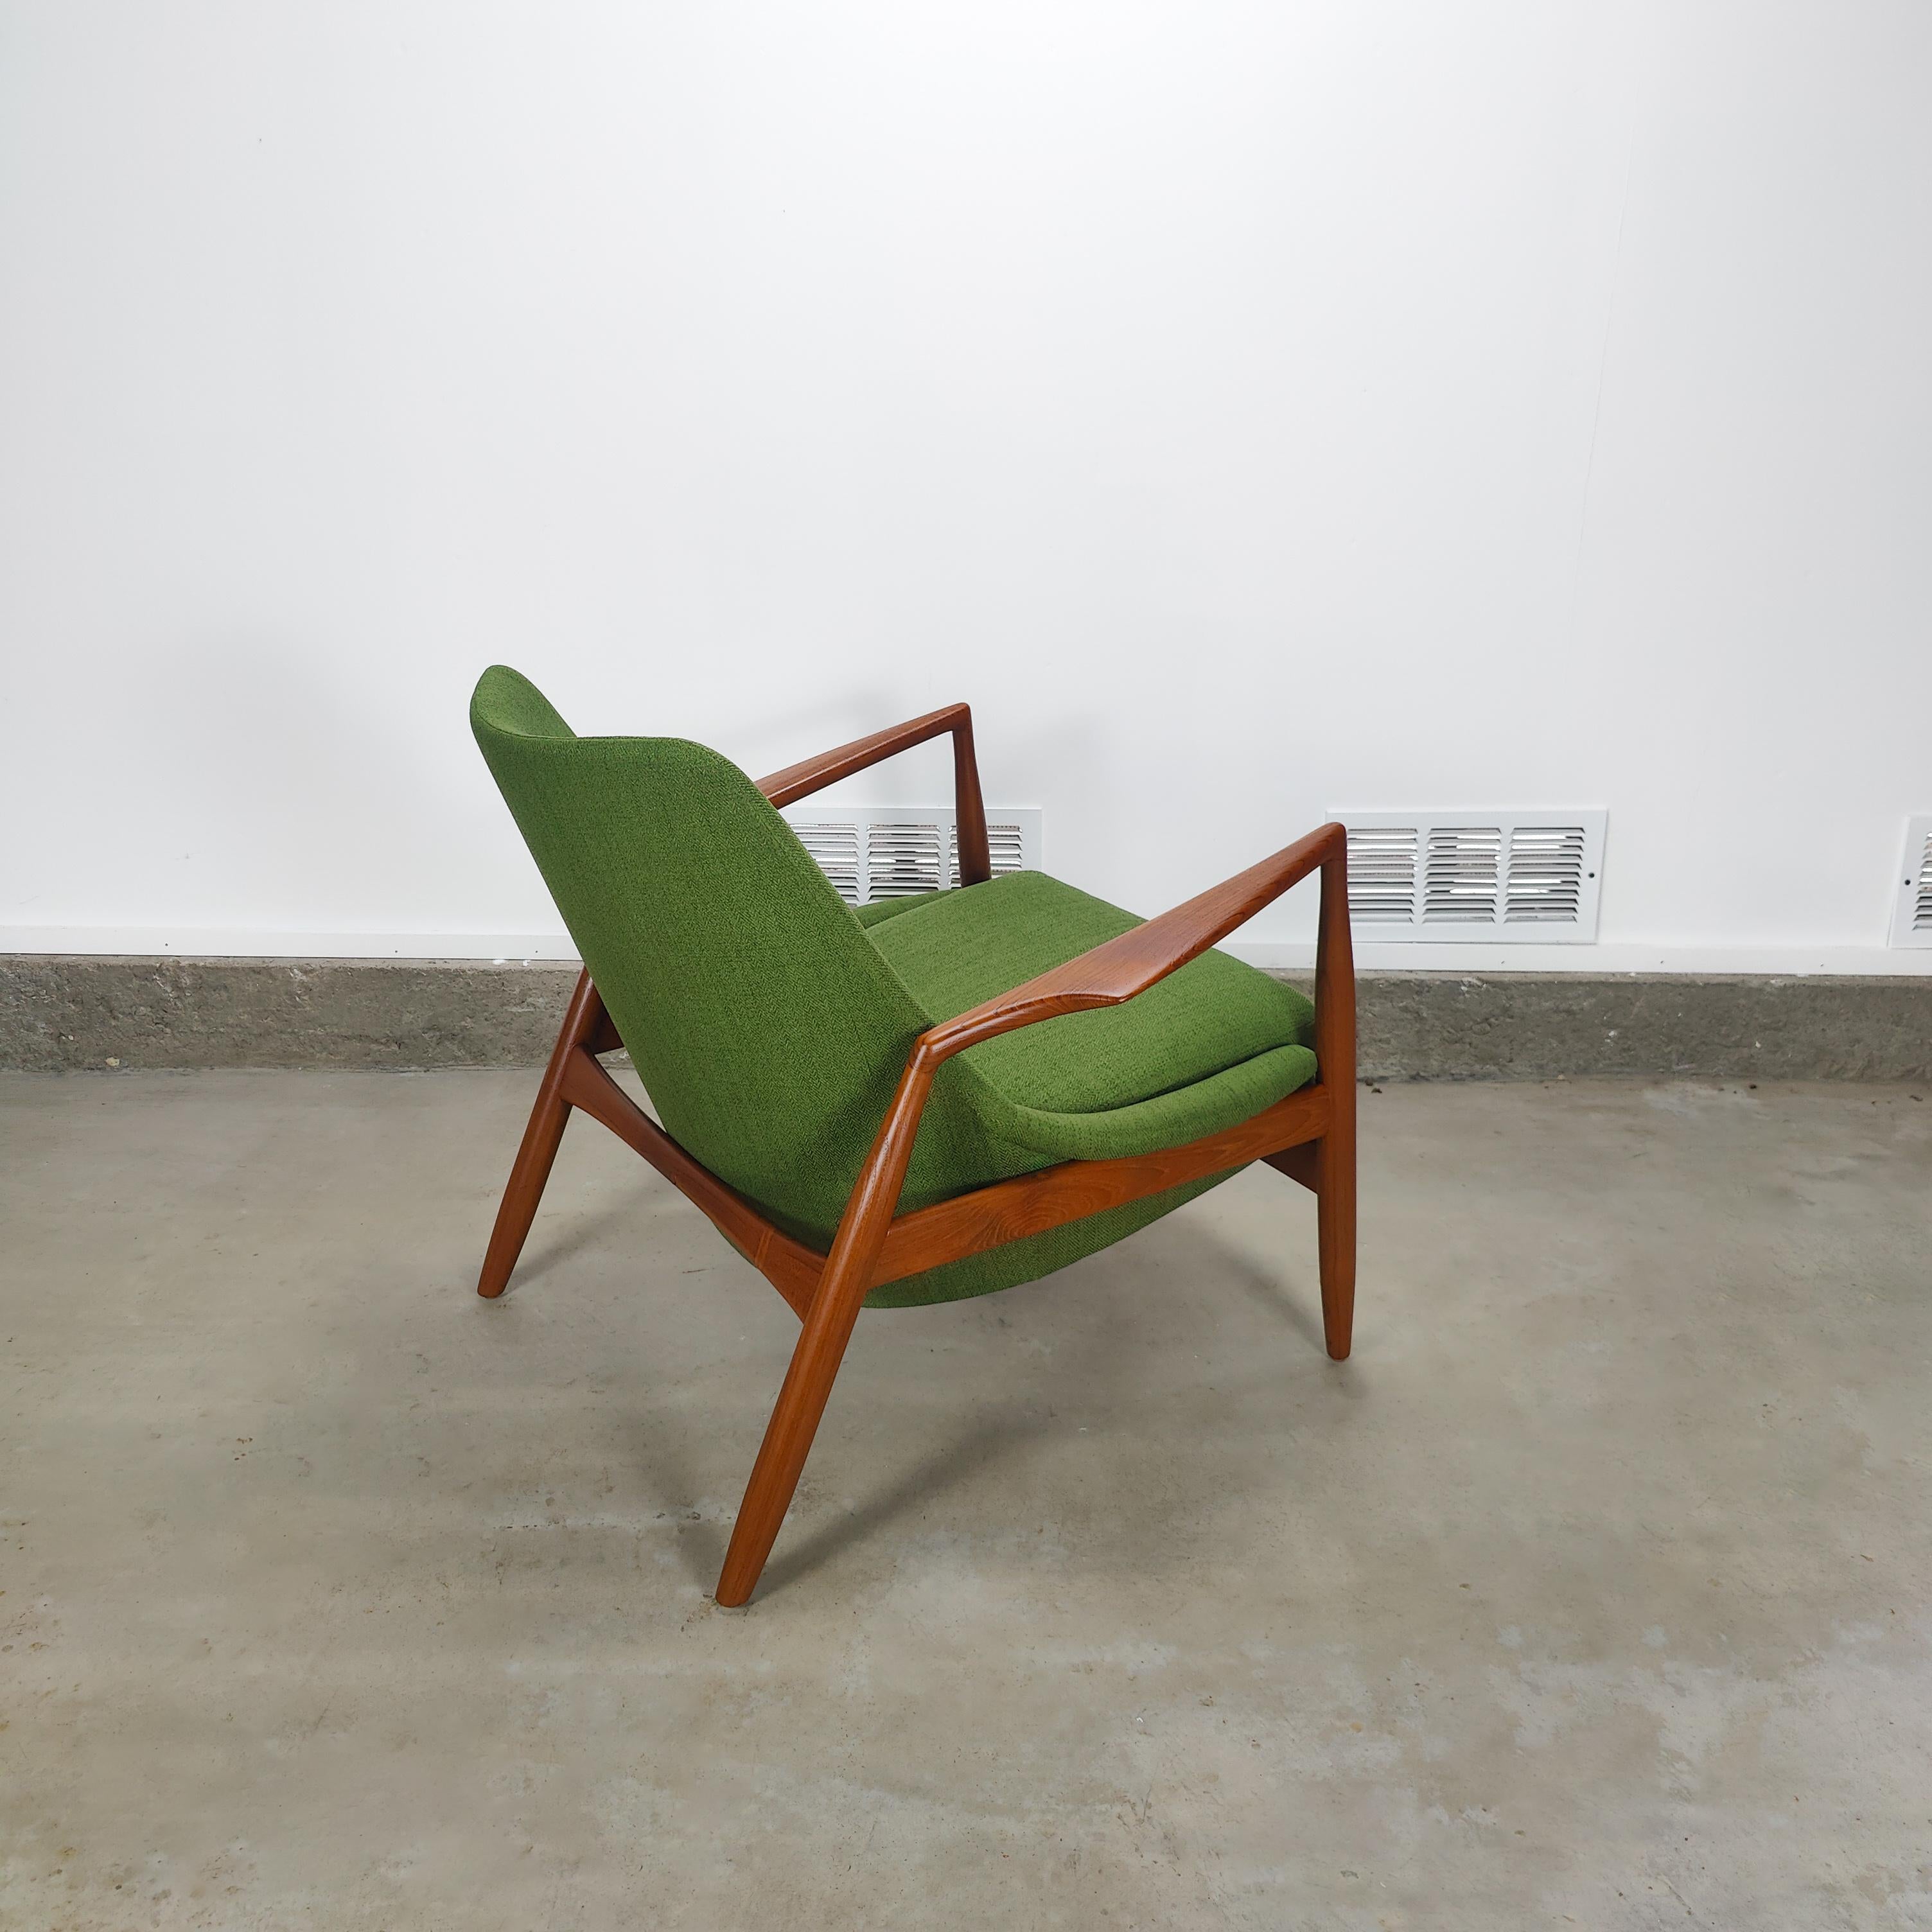 Just in, a stunning lounge chair by Ib Kofod-Larsen for OPE. Features a fully restored teak frame in excellent condition with new green fabric. Measures approximately 31.5